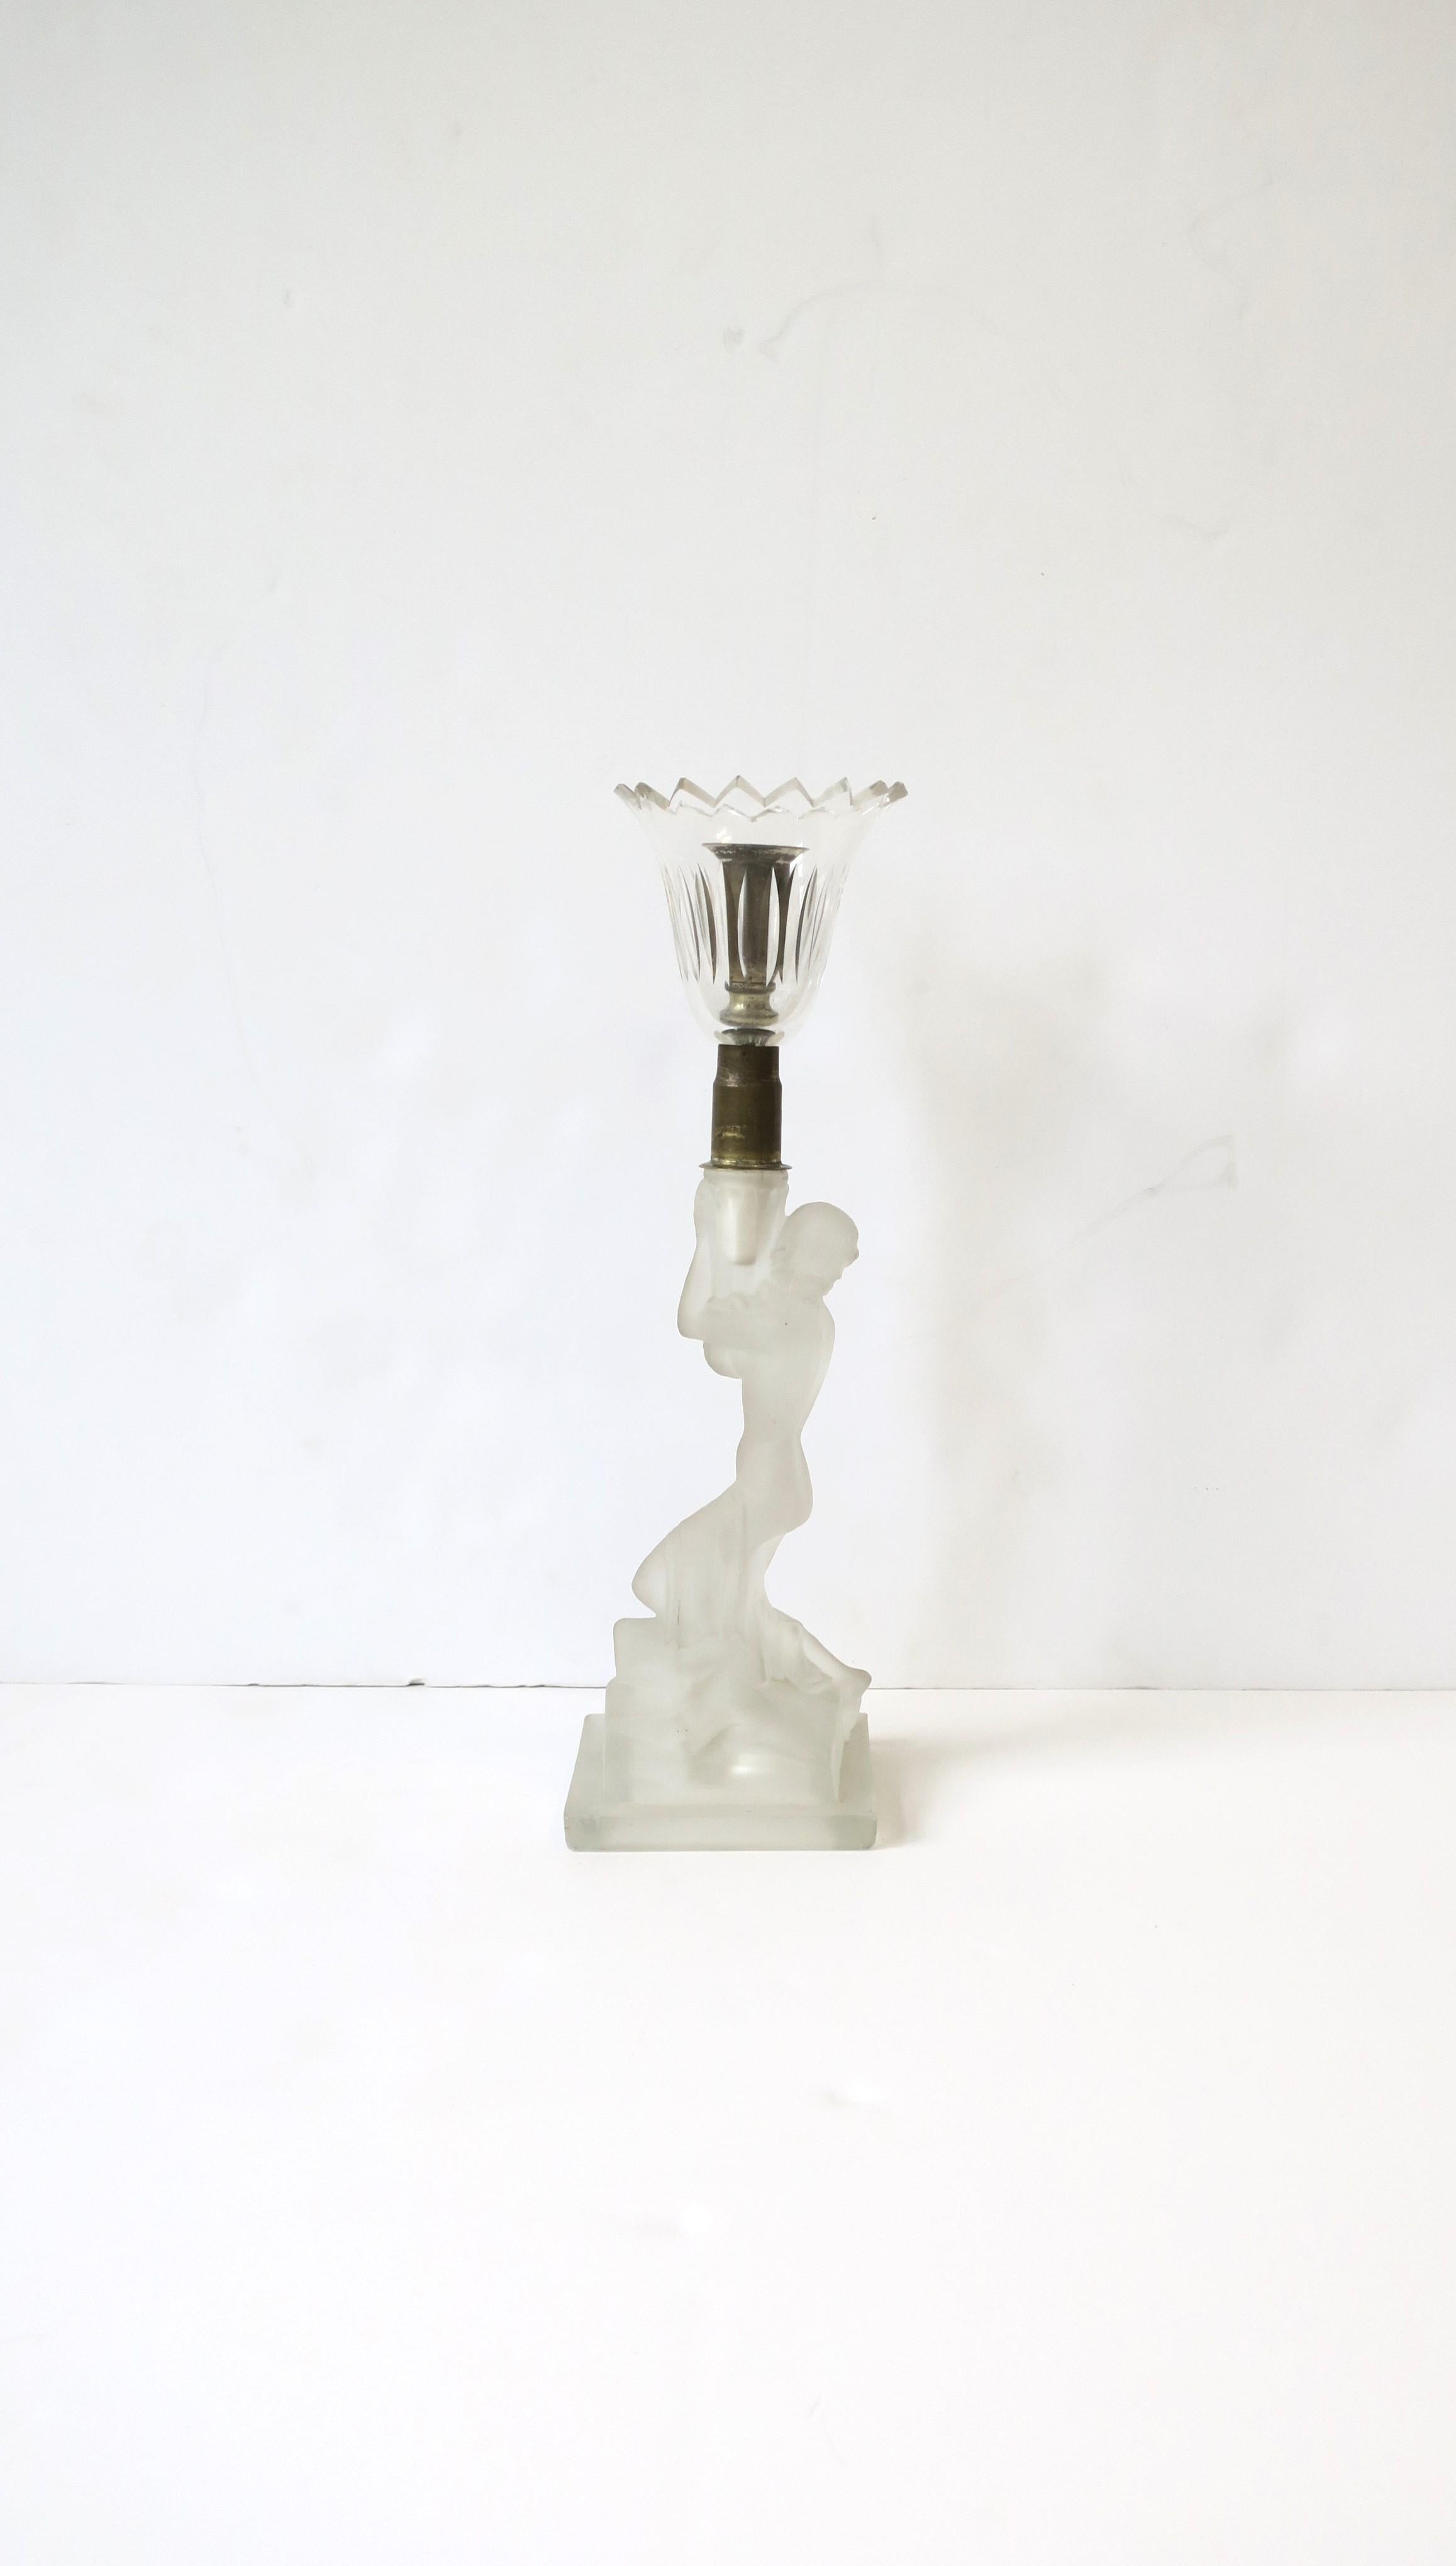 Art Deco Female Figurative Sculpture Candlestick Holder, Early 20th Century For Sale 3